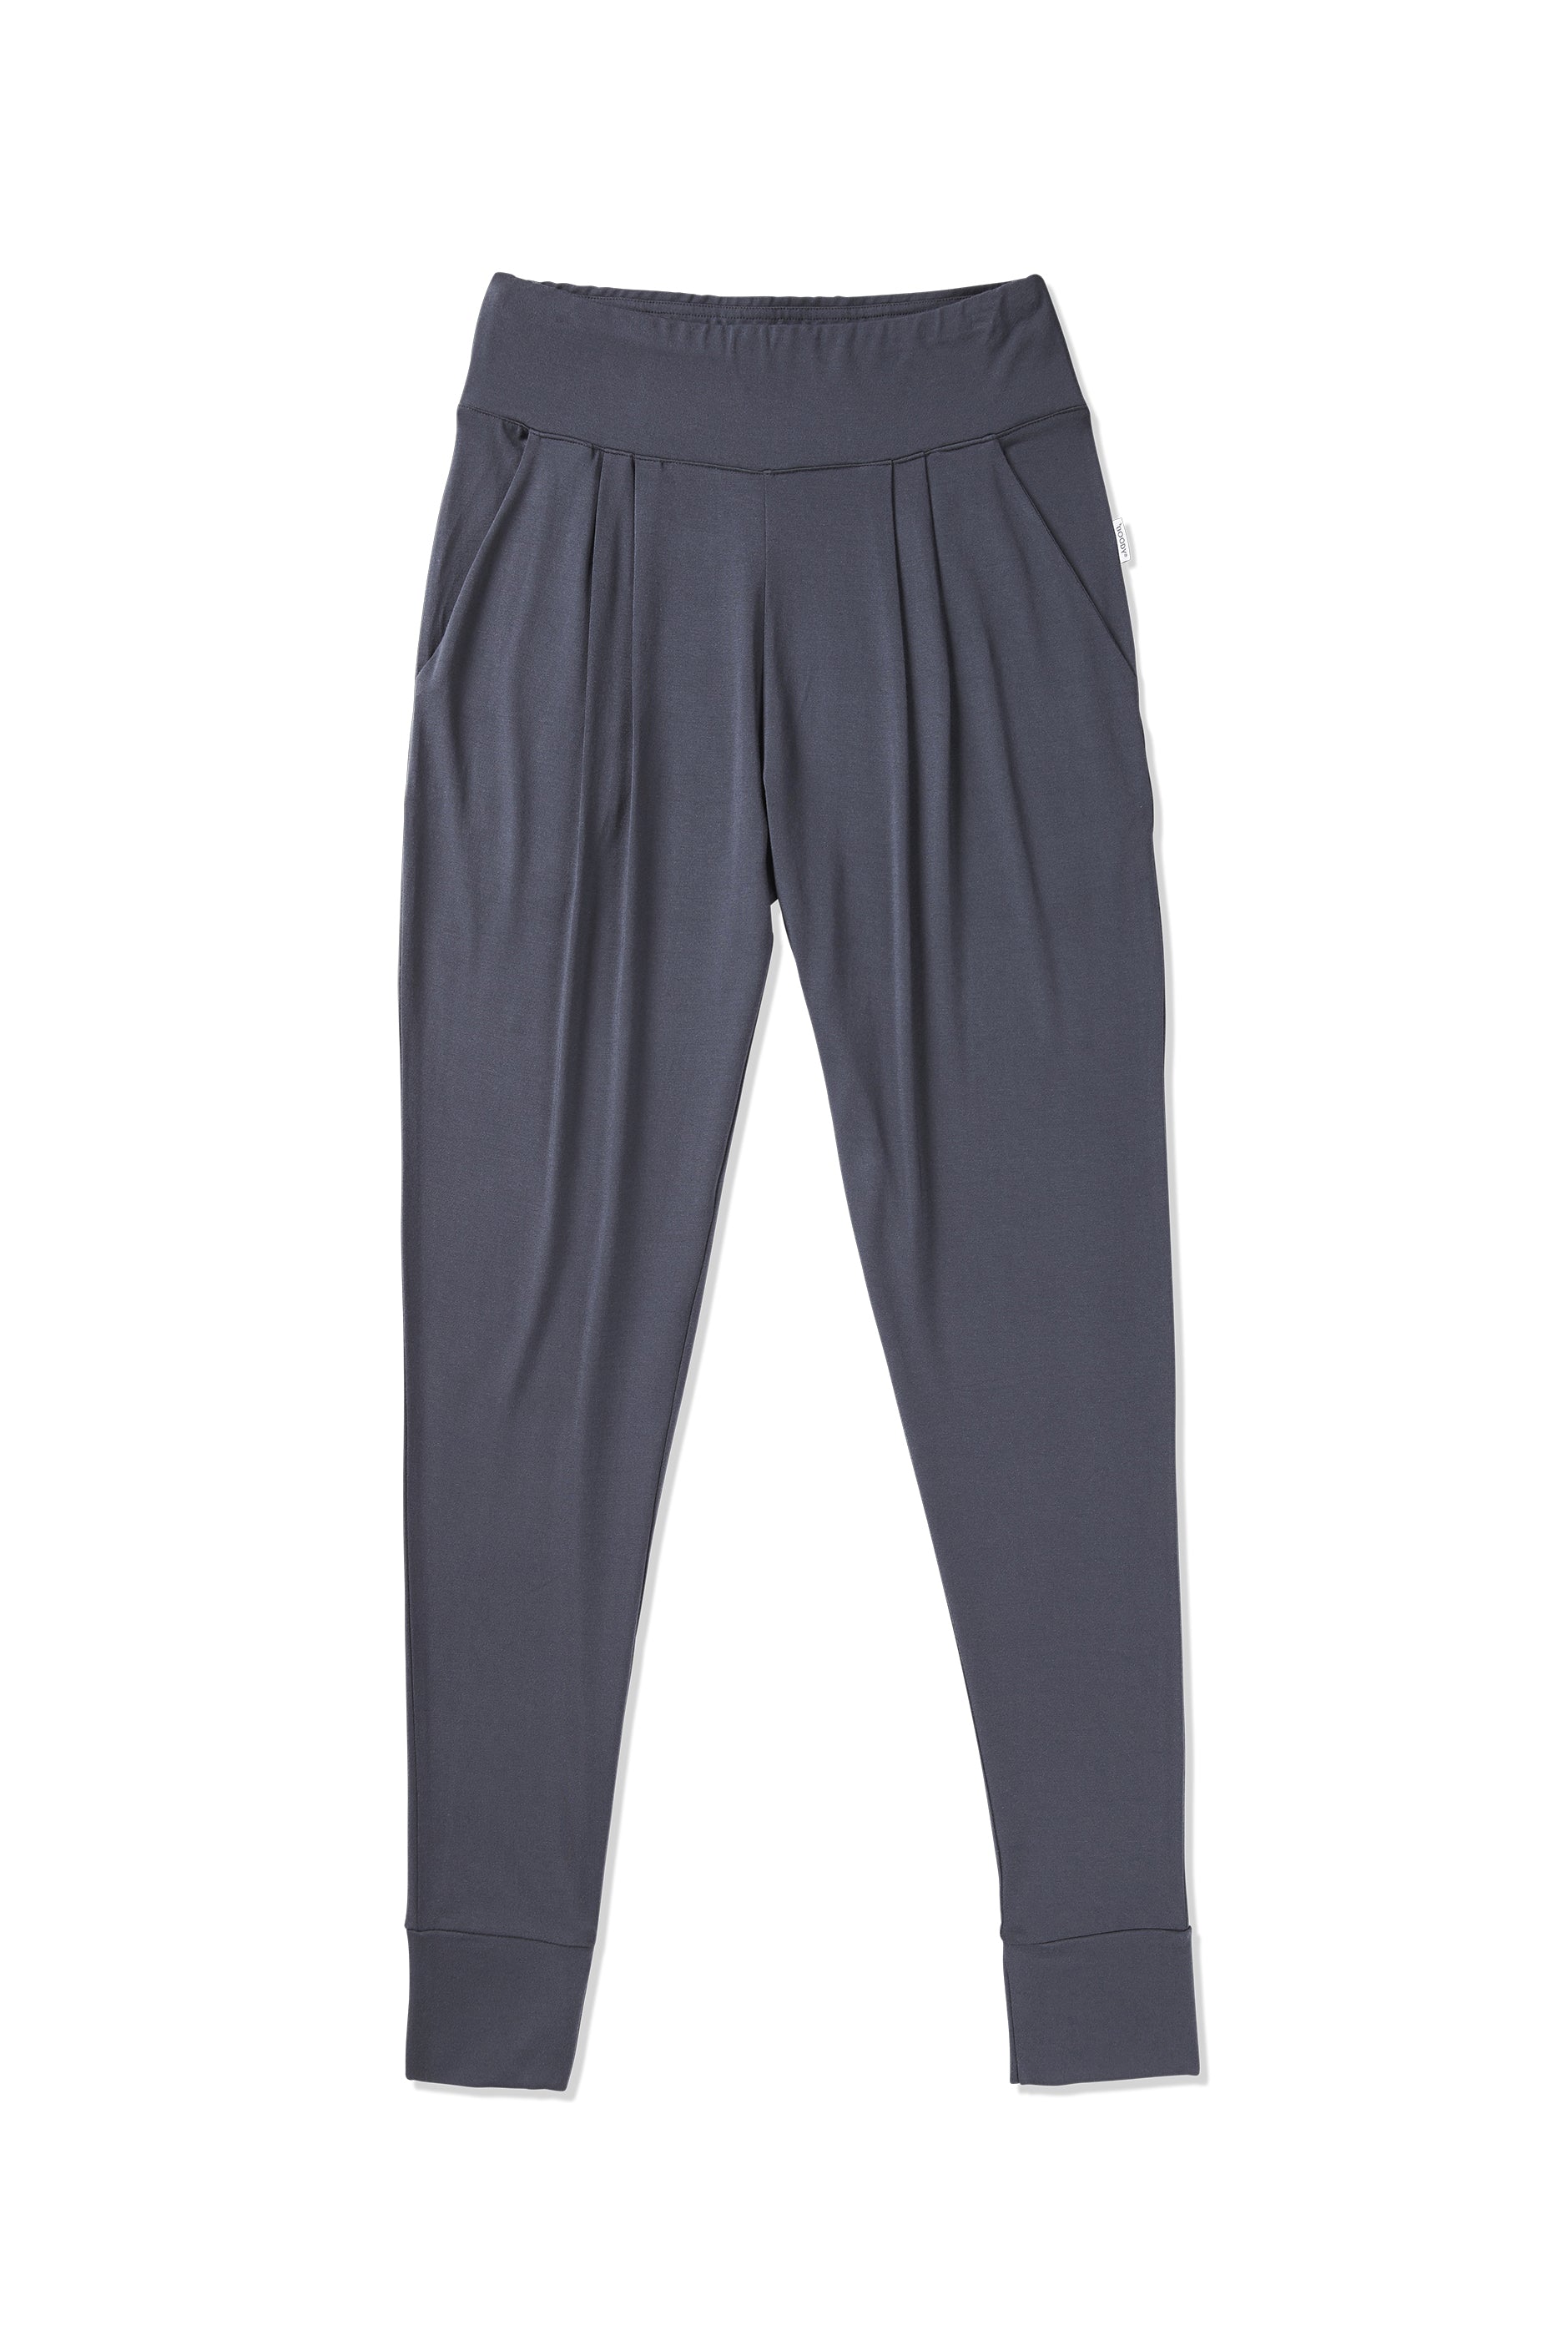 Downtime Lounge Pants in Storm